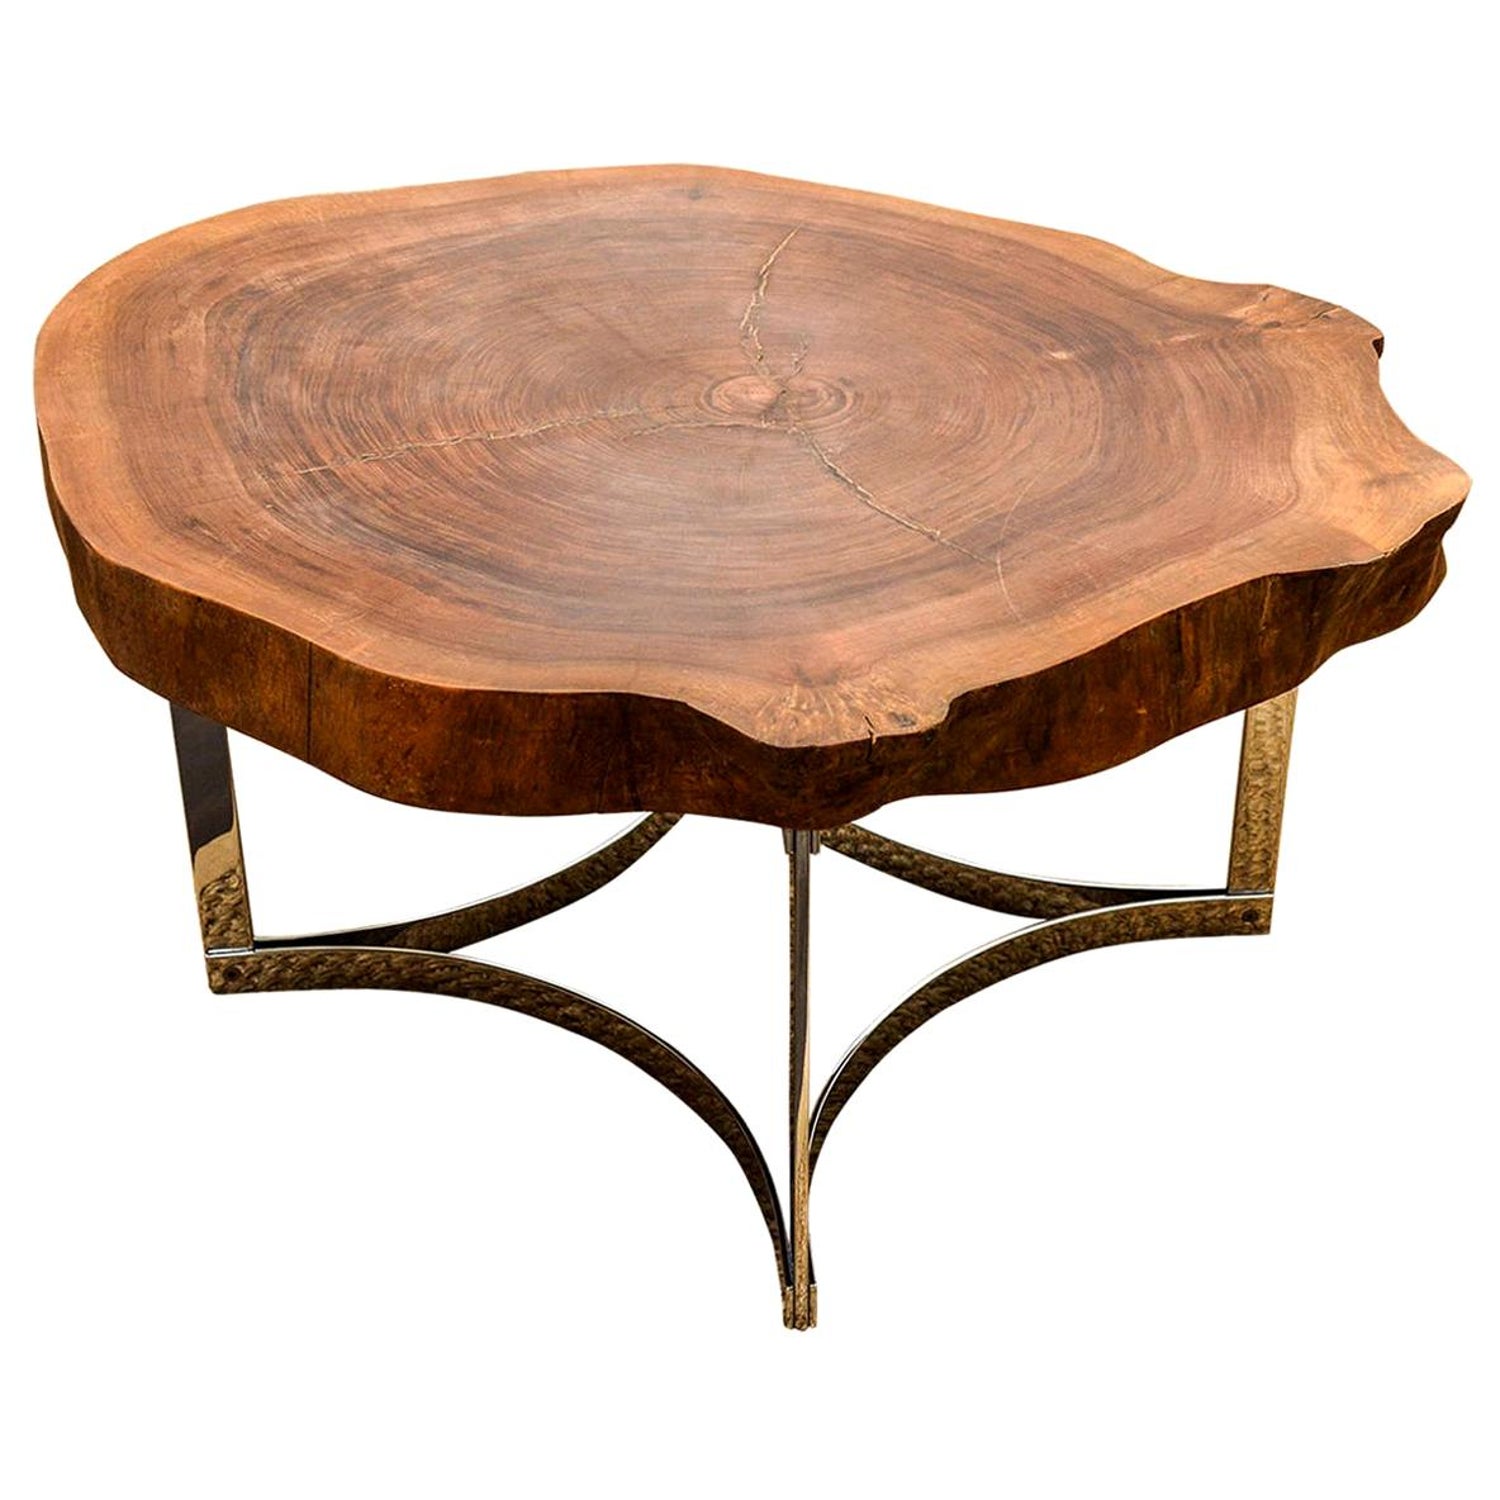 Live Edge Wood Slab Coffee Table On A Modernist Chrome Base By Jean Hubeaux For Sale At 1stdibs